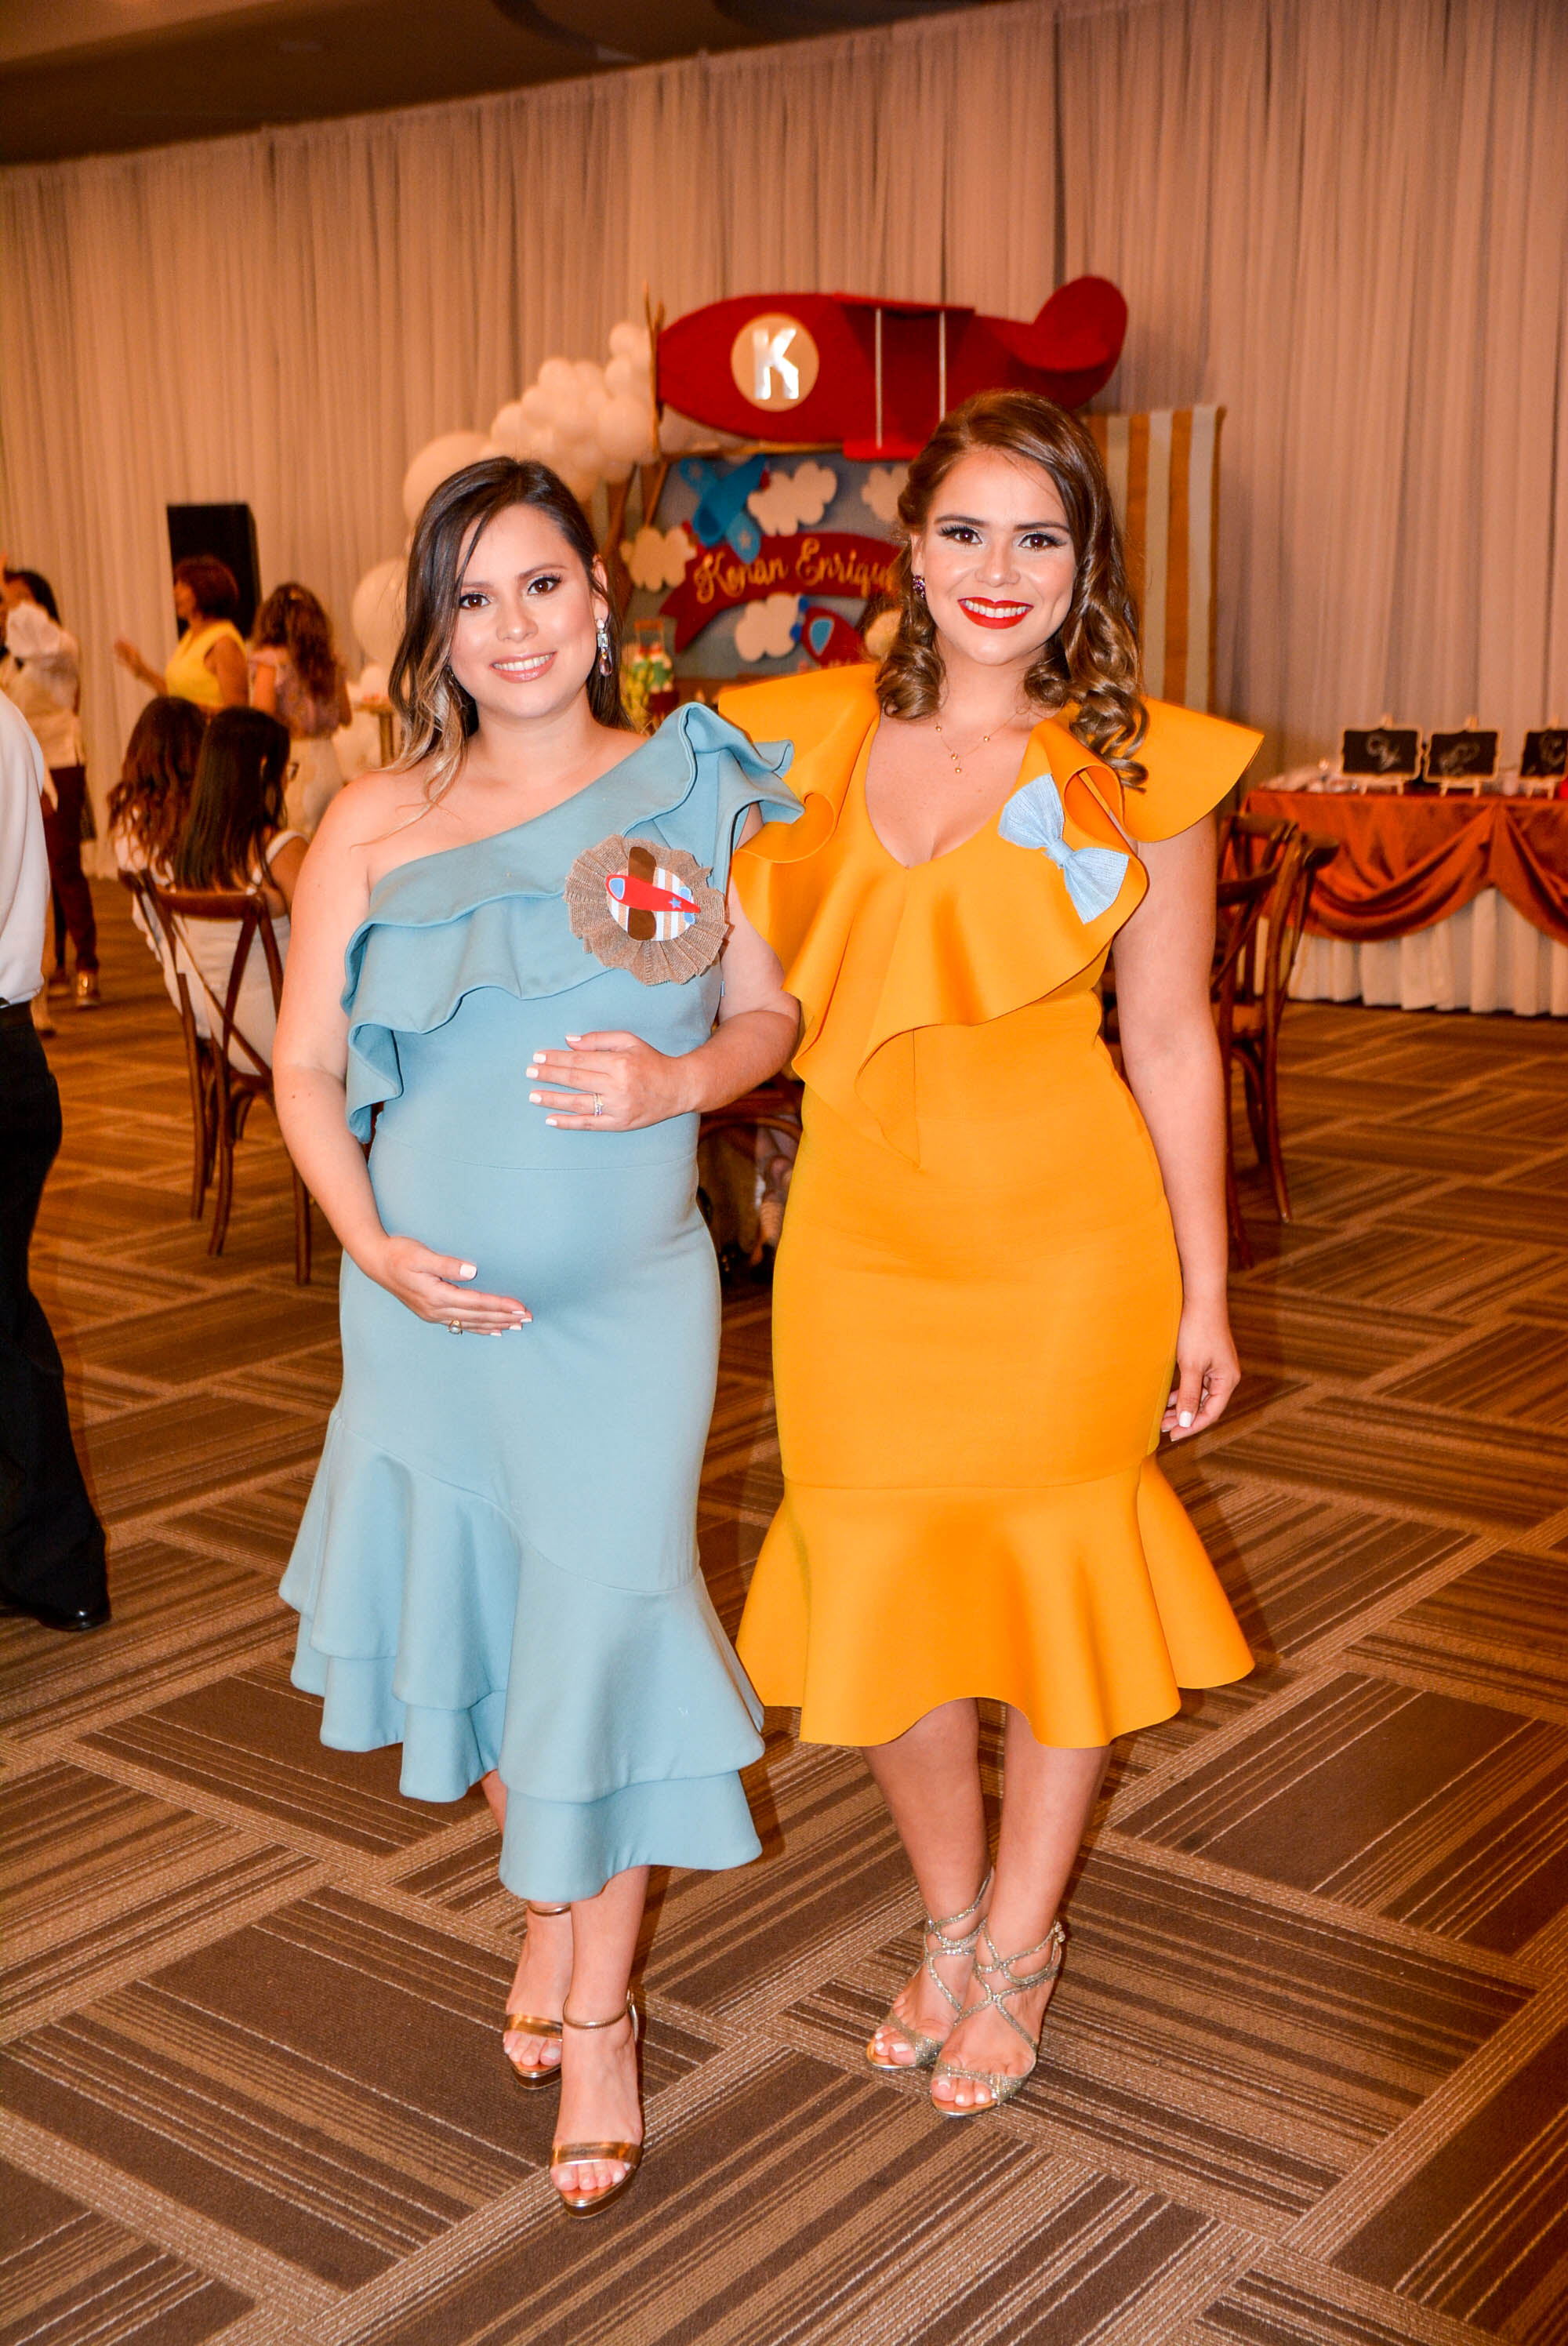 It's a boy! Baby Shower para Rossy Morales